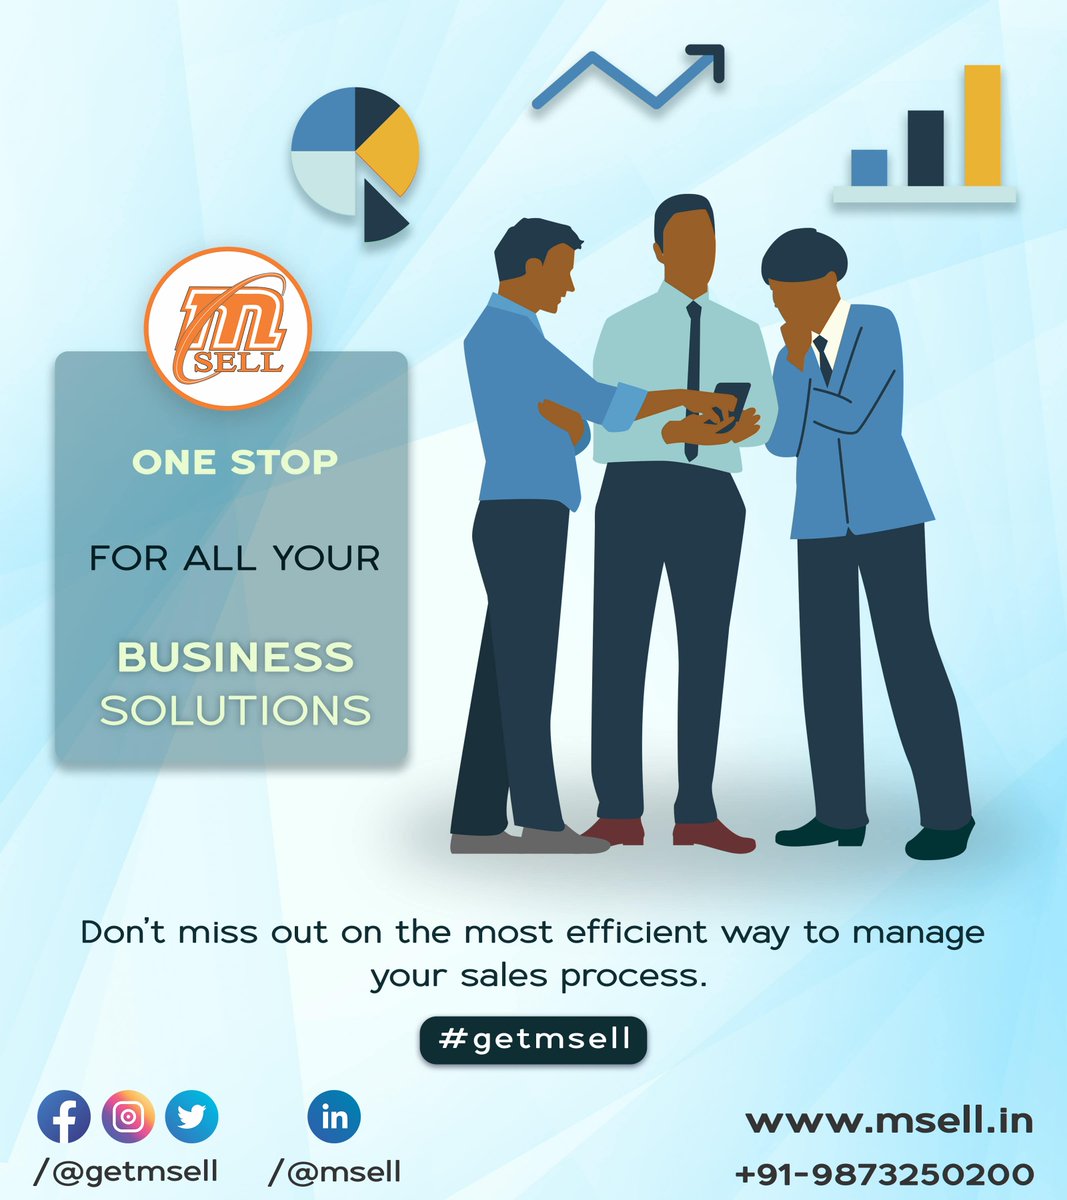 With mSELL, you can easily manage your sales pipeline, see how you’re performing against your goals and get real-time updates on your team’s progress.

Contact us directly @ +91-9873250200.

#salesforceautomation #salesforceindia #fmcgindustry #fmcg #cpg #cpgindustry #saas #india